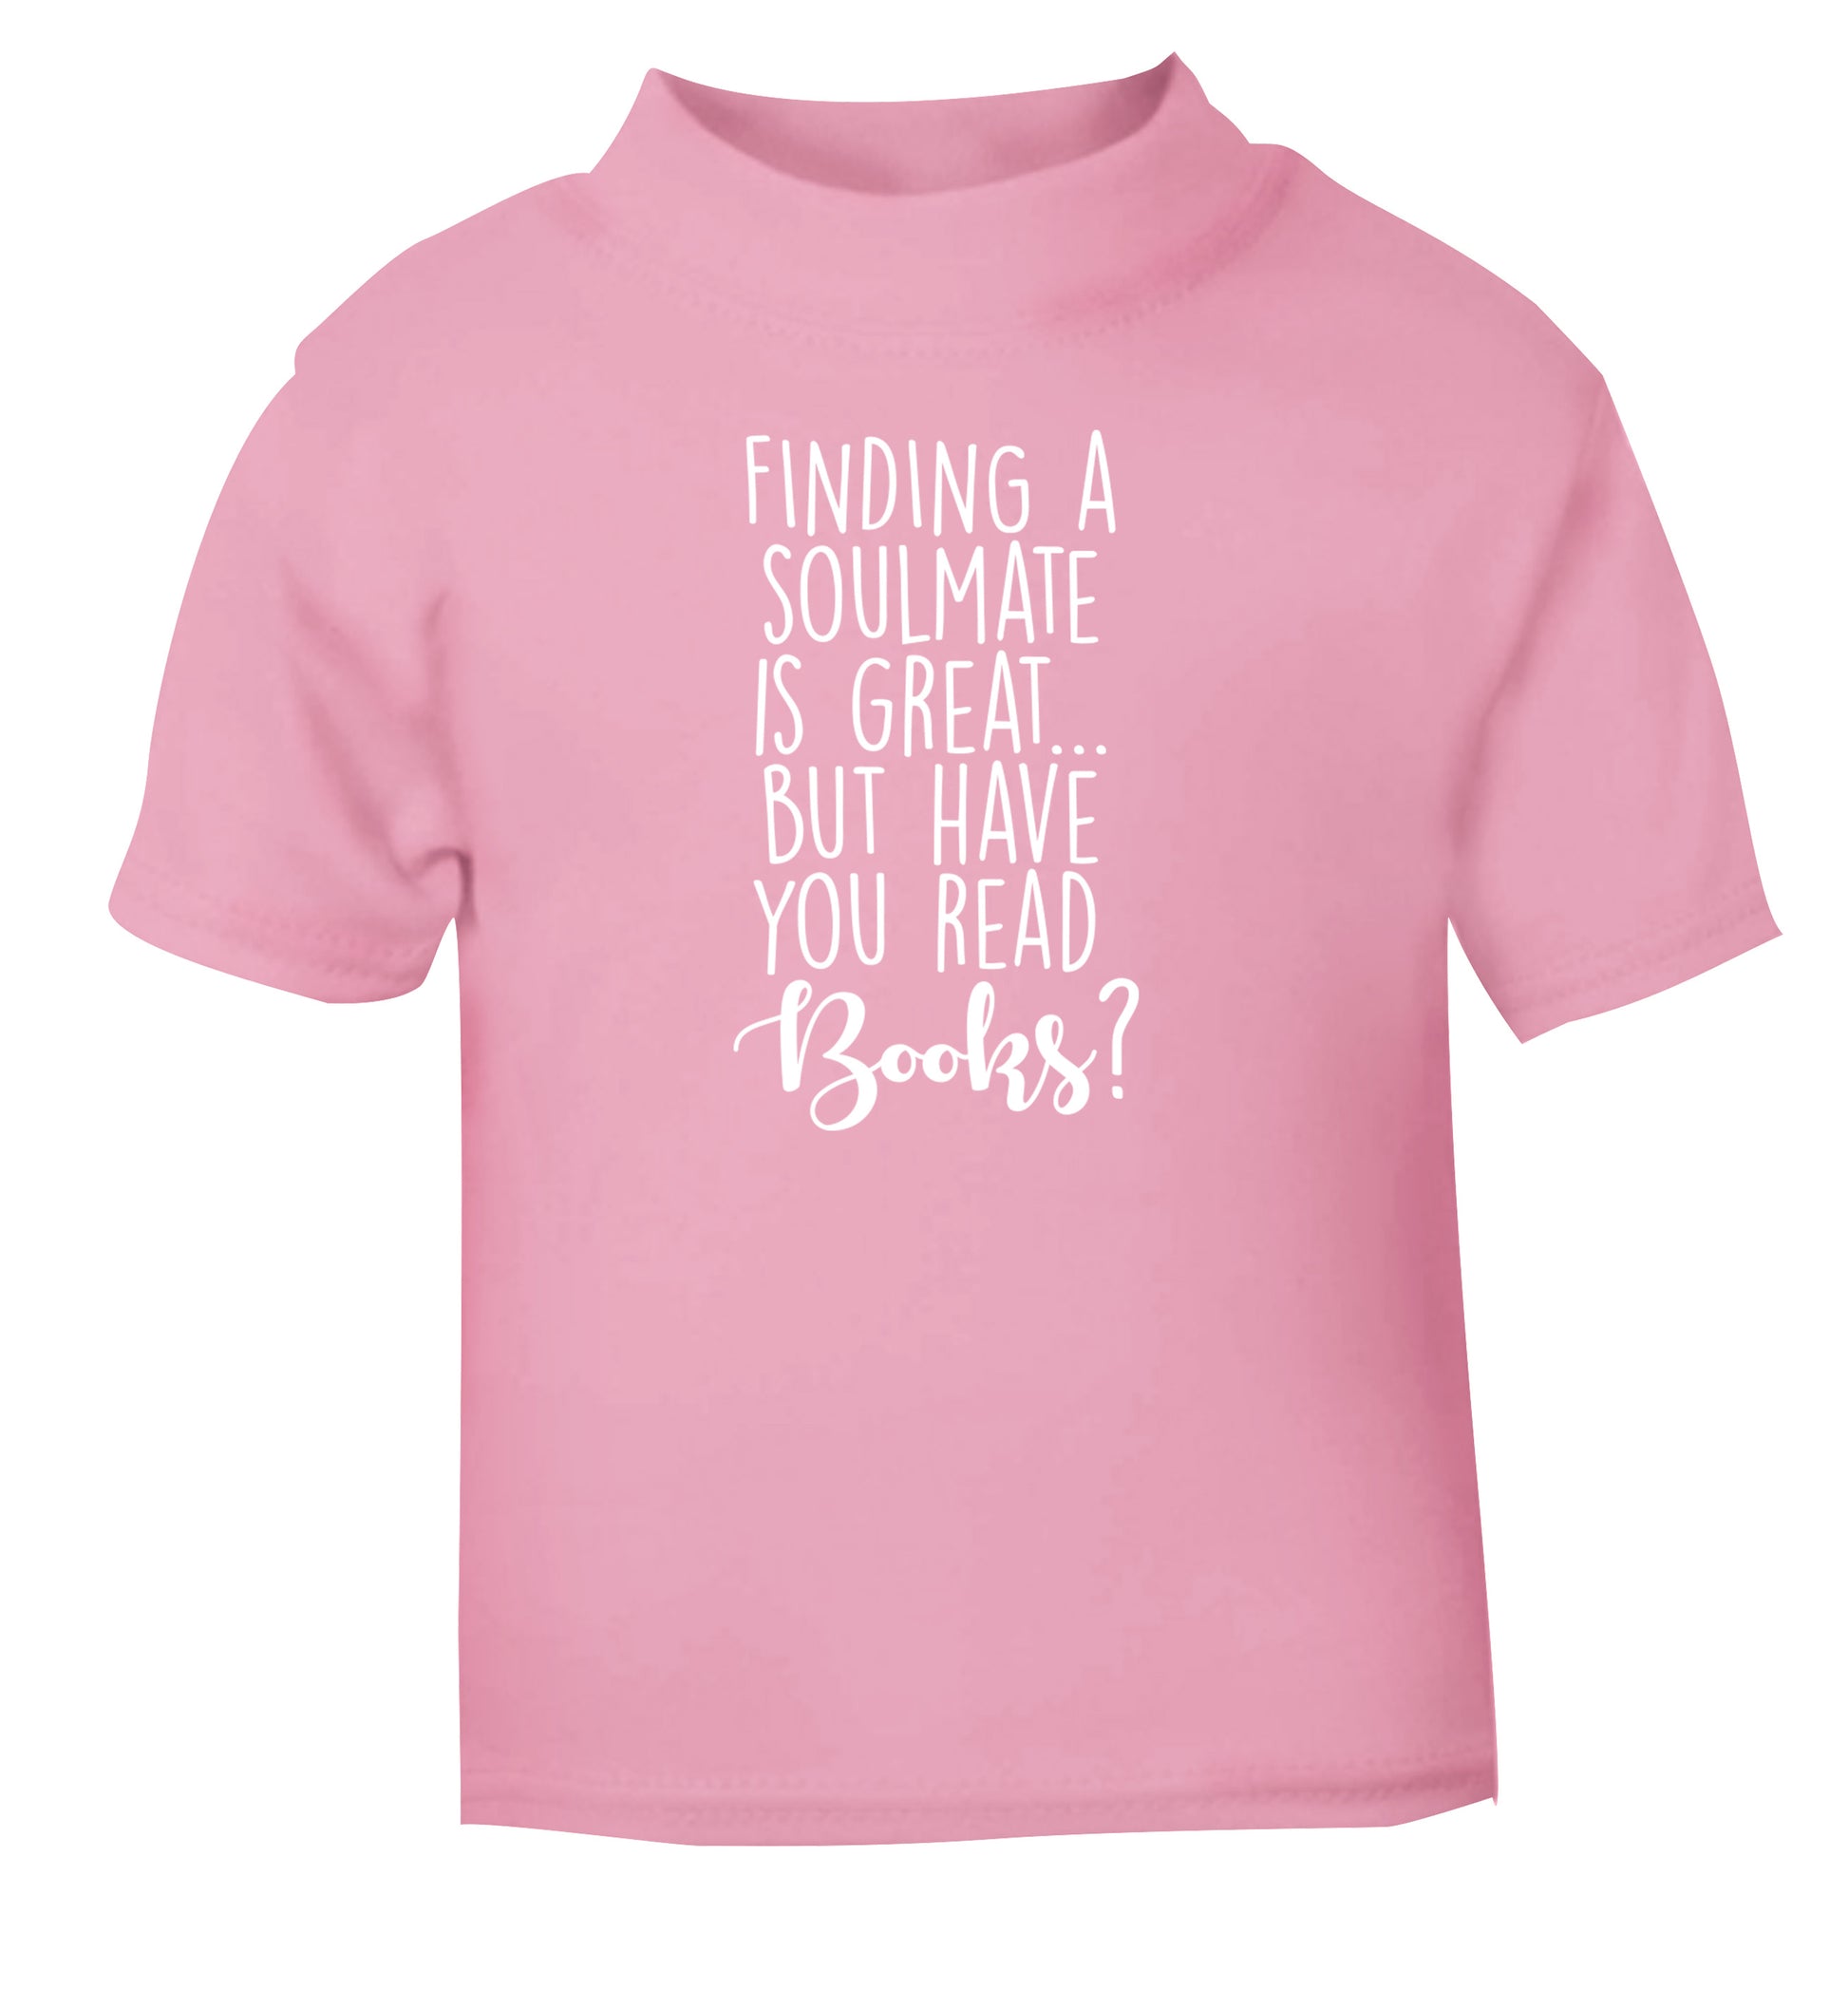 Finding a soulmate is great but have you read books? light pink Baby Toddler Tshirt 2 Years